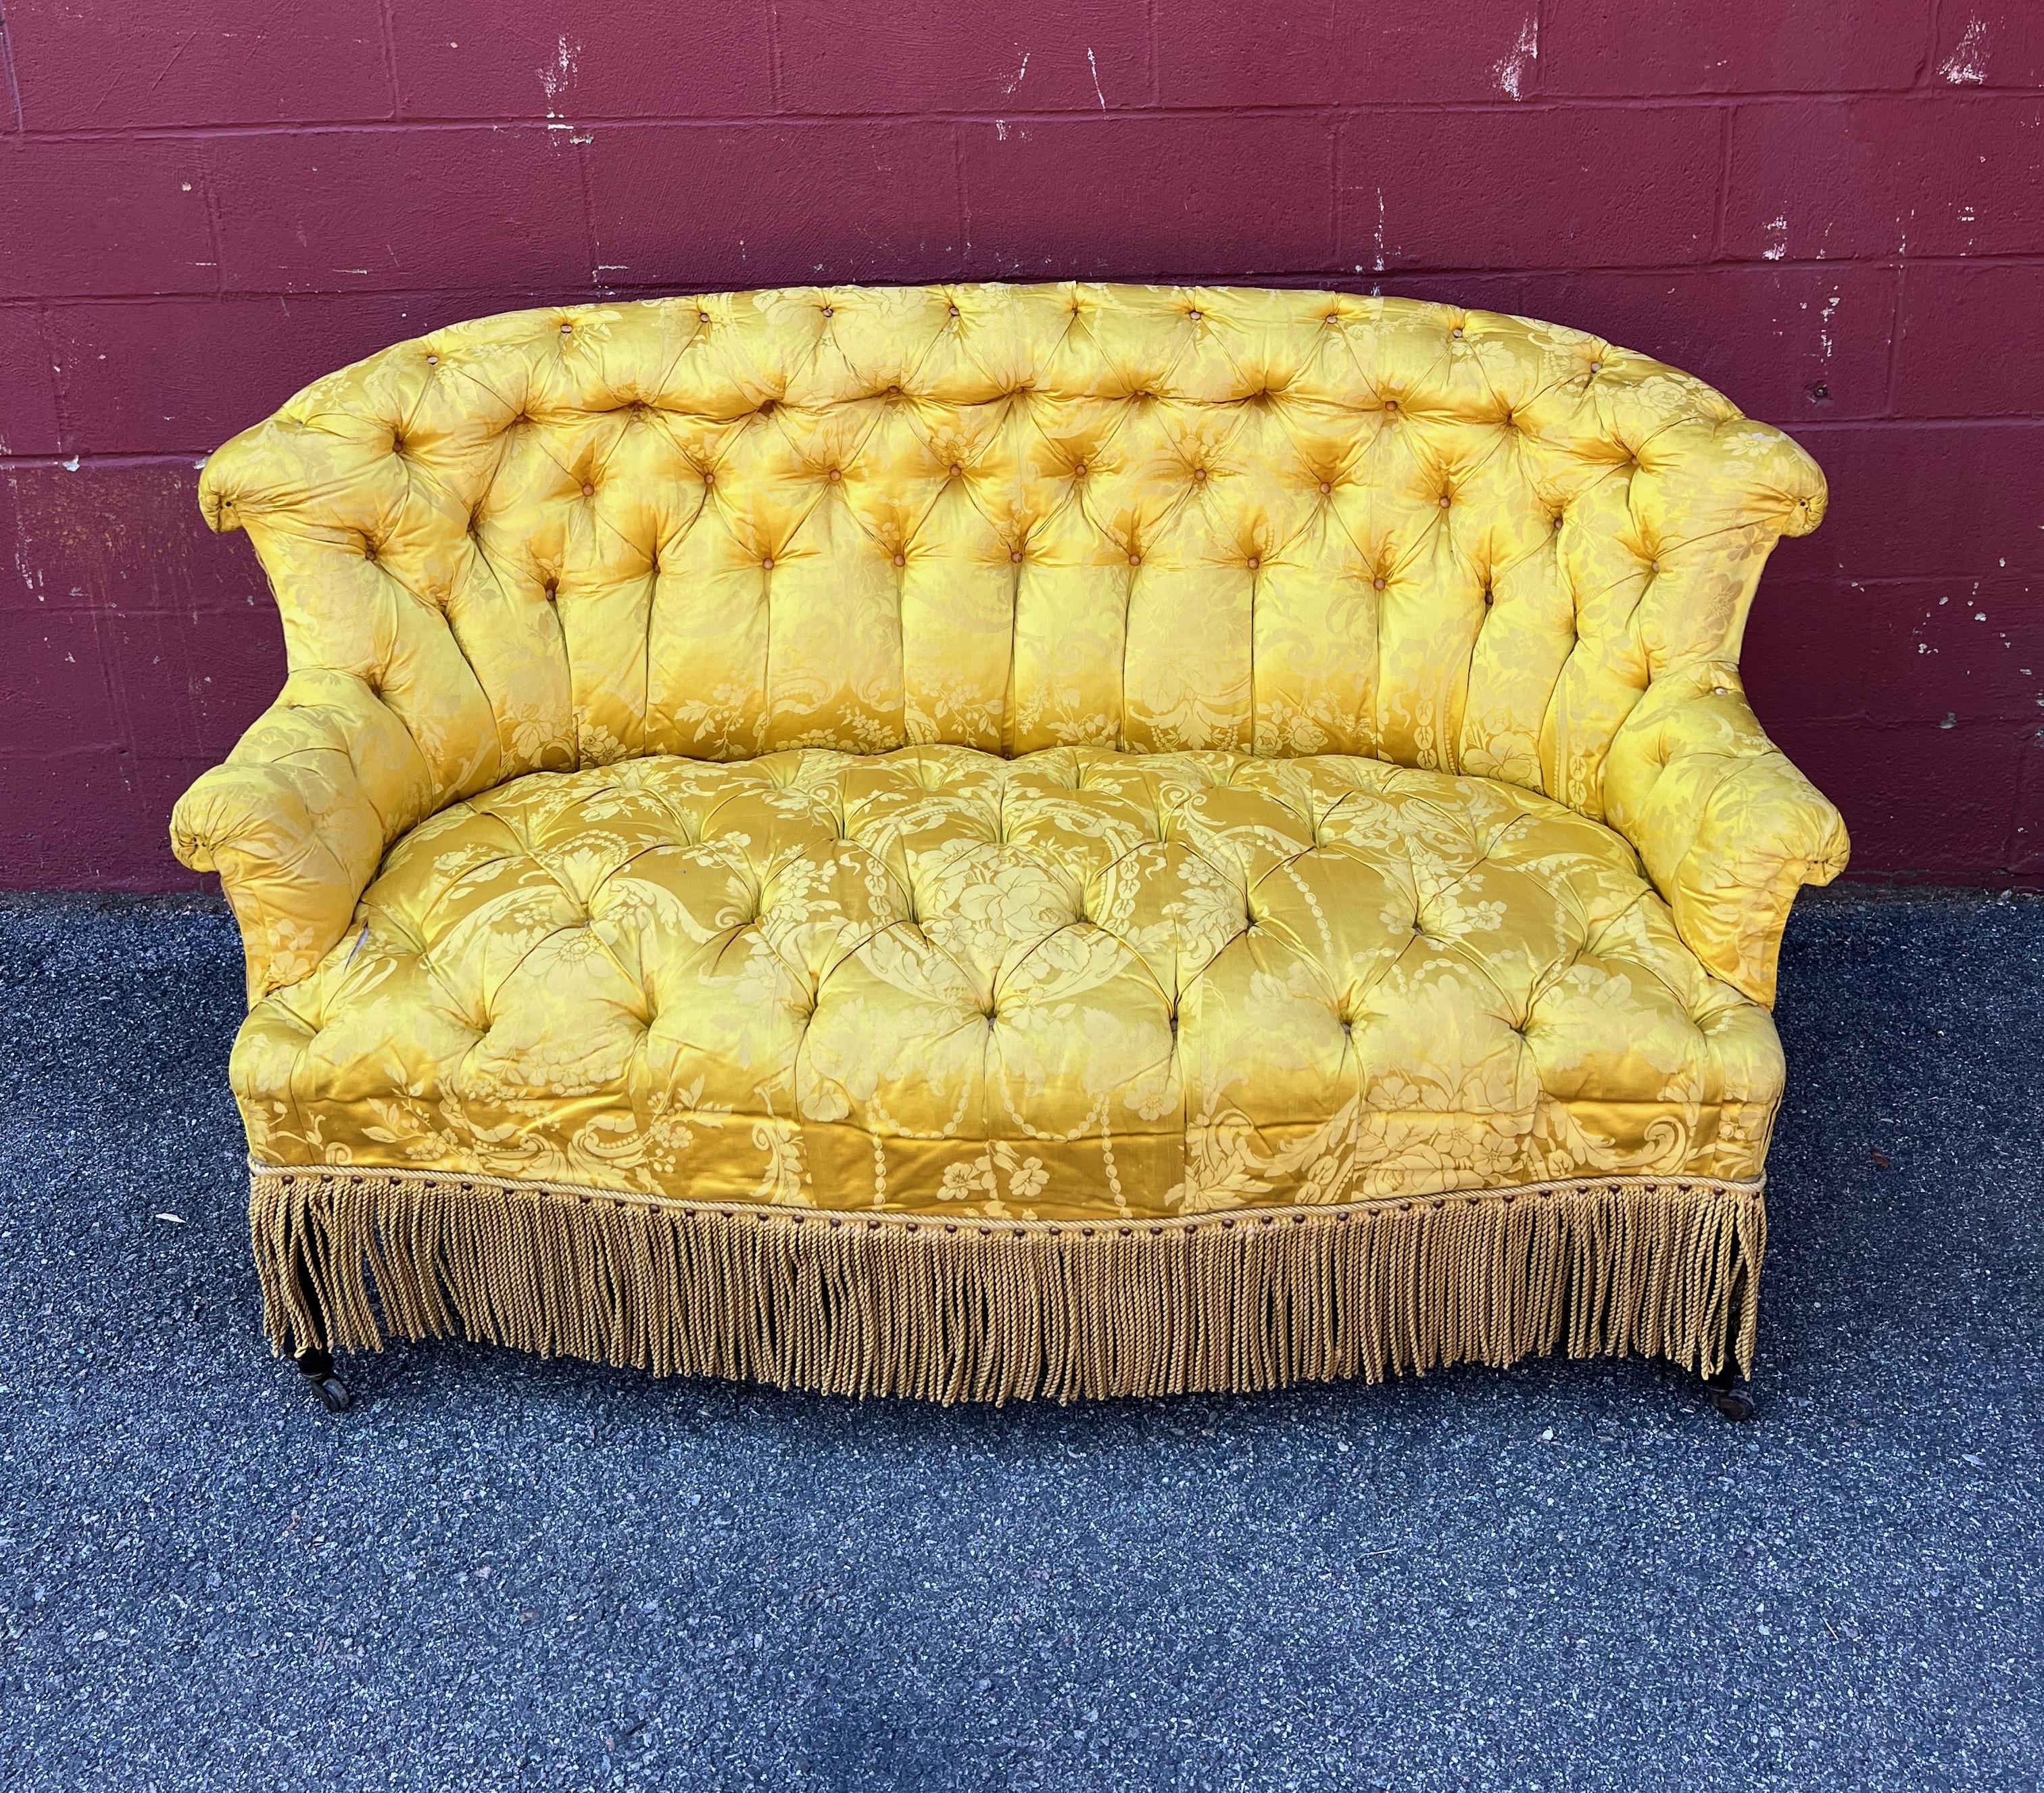 An  exquisitely tufted small sofa or settee with graceful rolled arms and back. Both the back and seat are tufted in a yellow/ gold damask silk and the back is upholstered in a contrasting solid fabric. The sofa is finished off in a matching